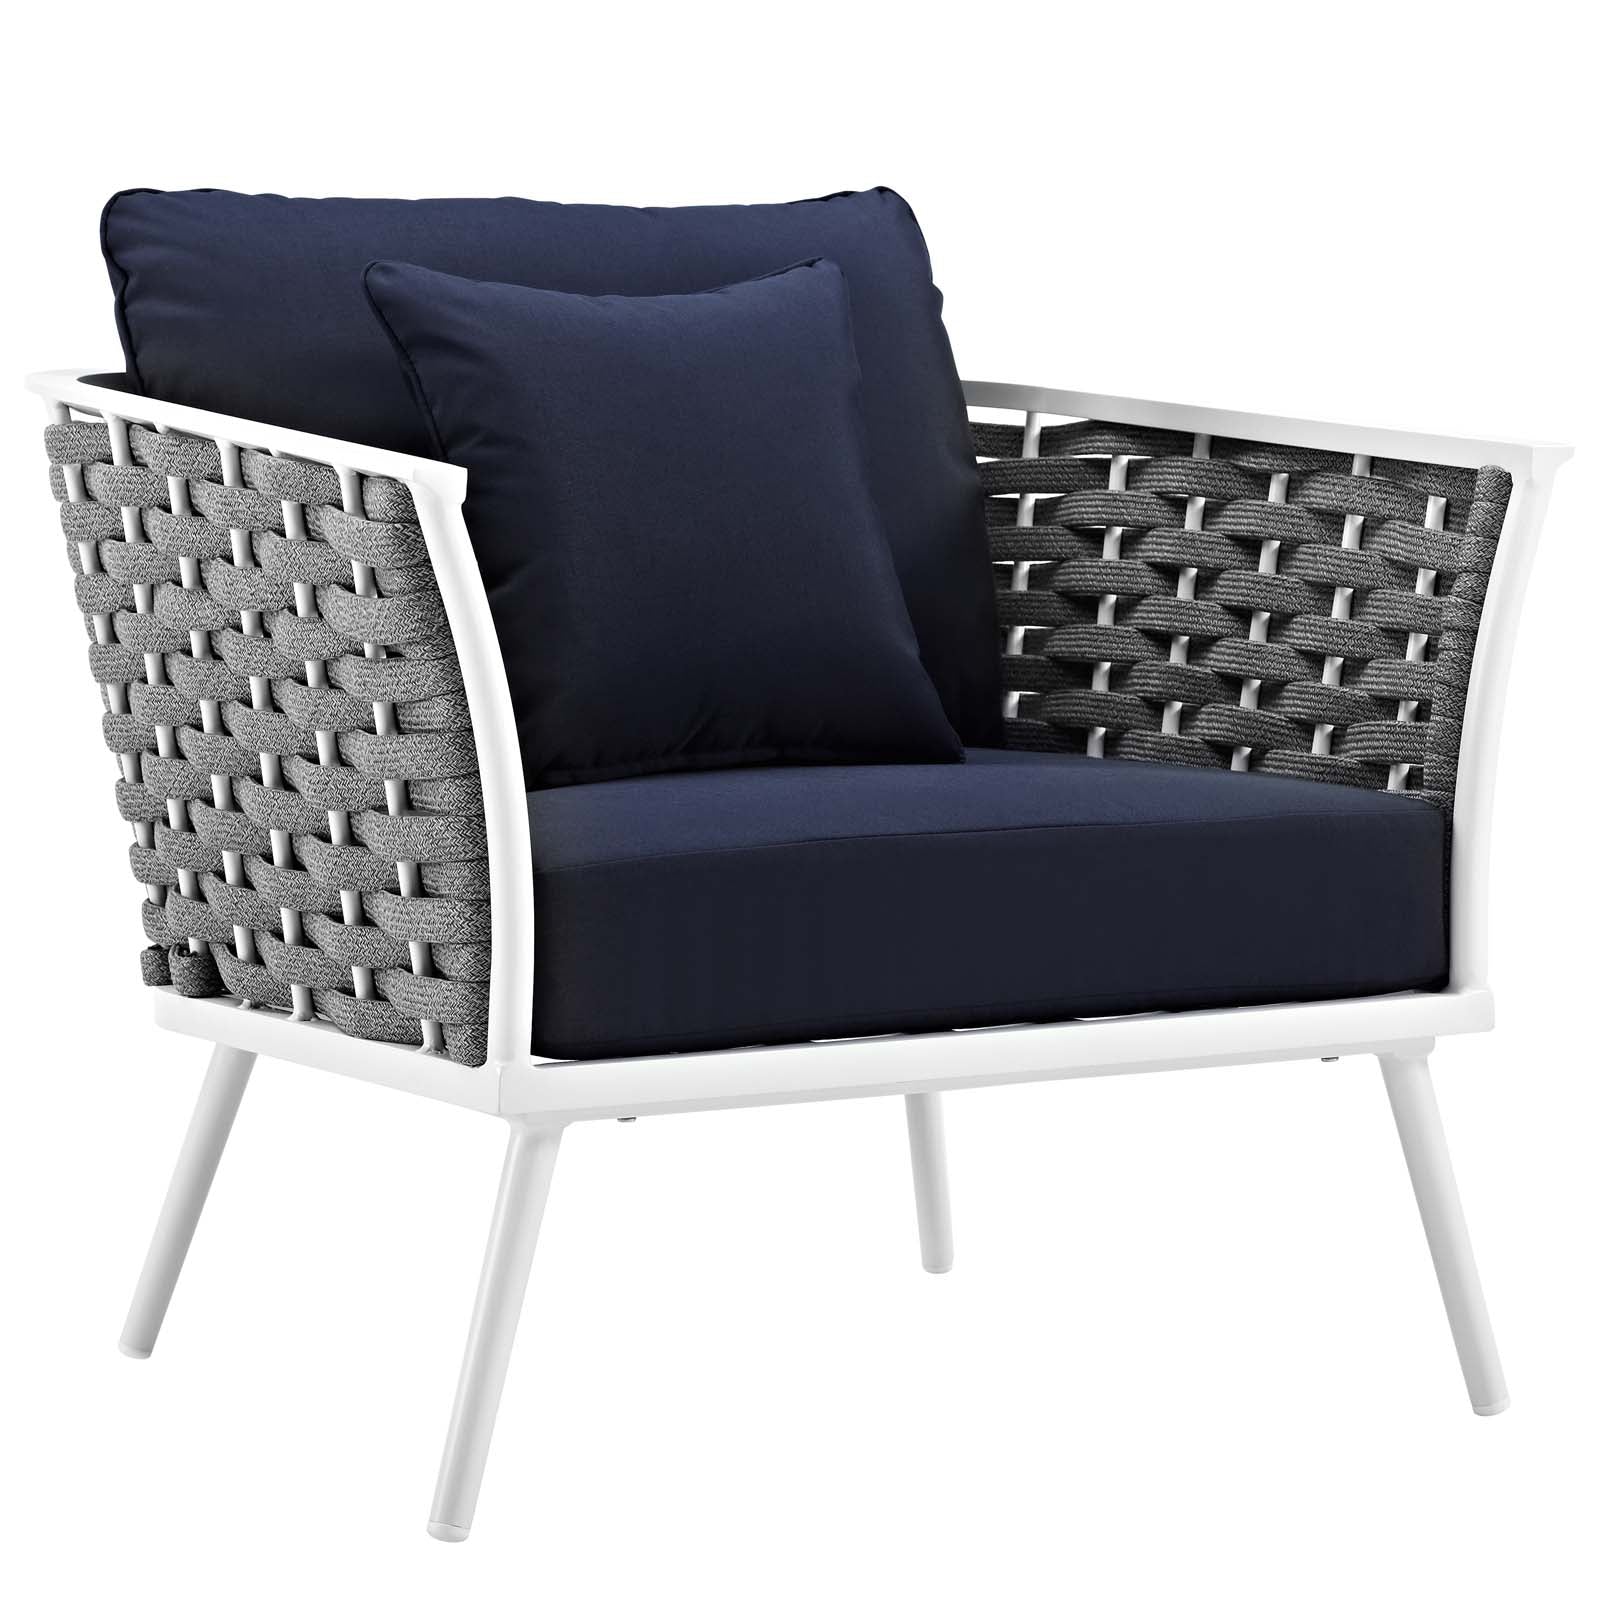 Modway Outdoor Chairs - Stance Armchair Outdoor Patio Set White & Navy (Set of 2)